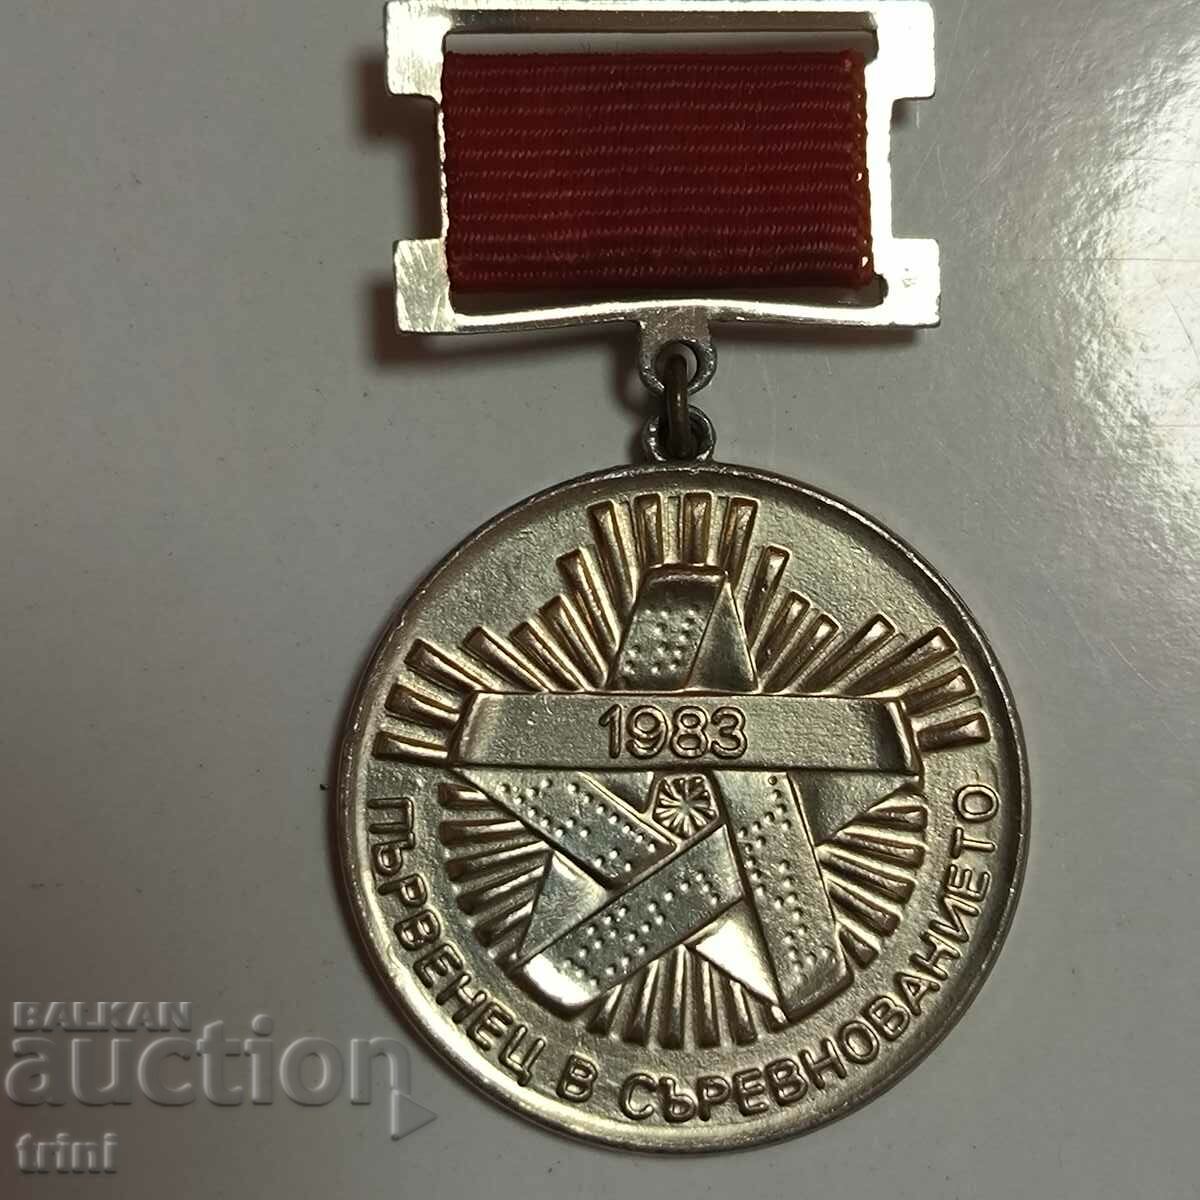 First place medal in the 1983 competition